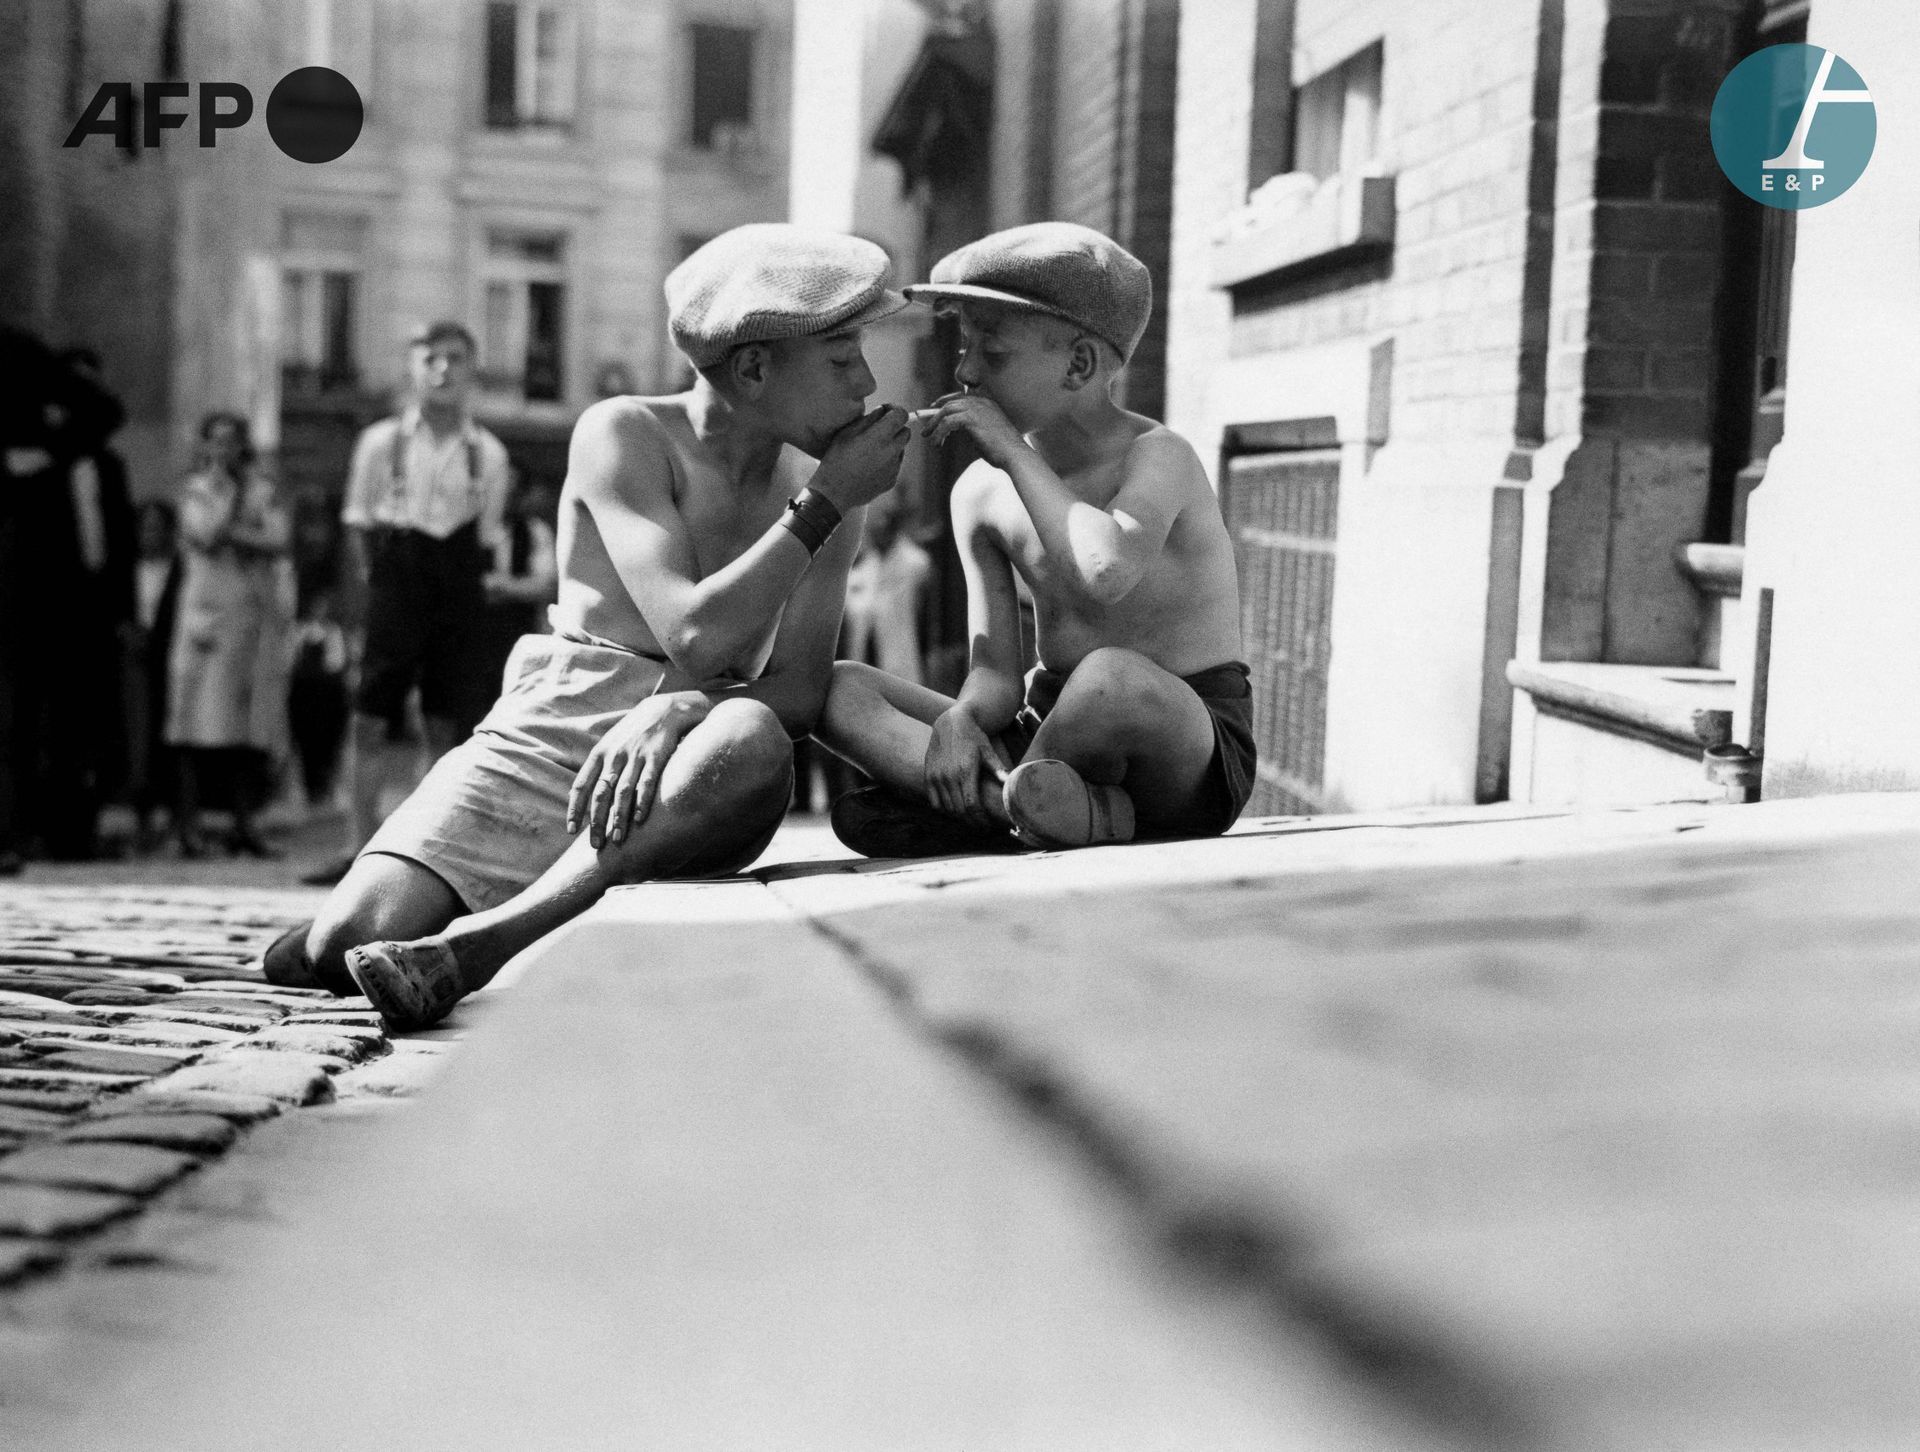 Null AFP

Two young boys smoking in the street, June 1936.

Two young boys smoki&hellip;